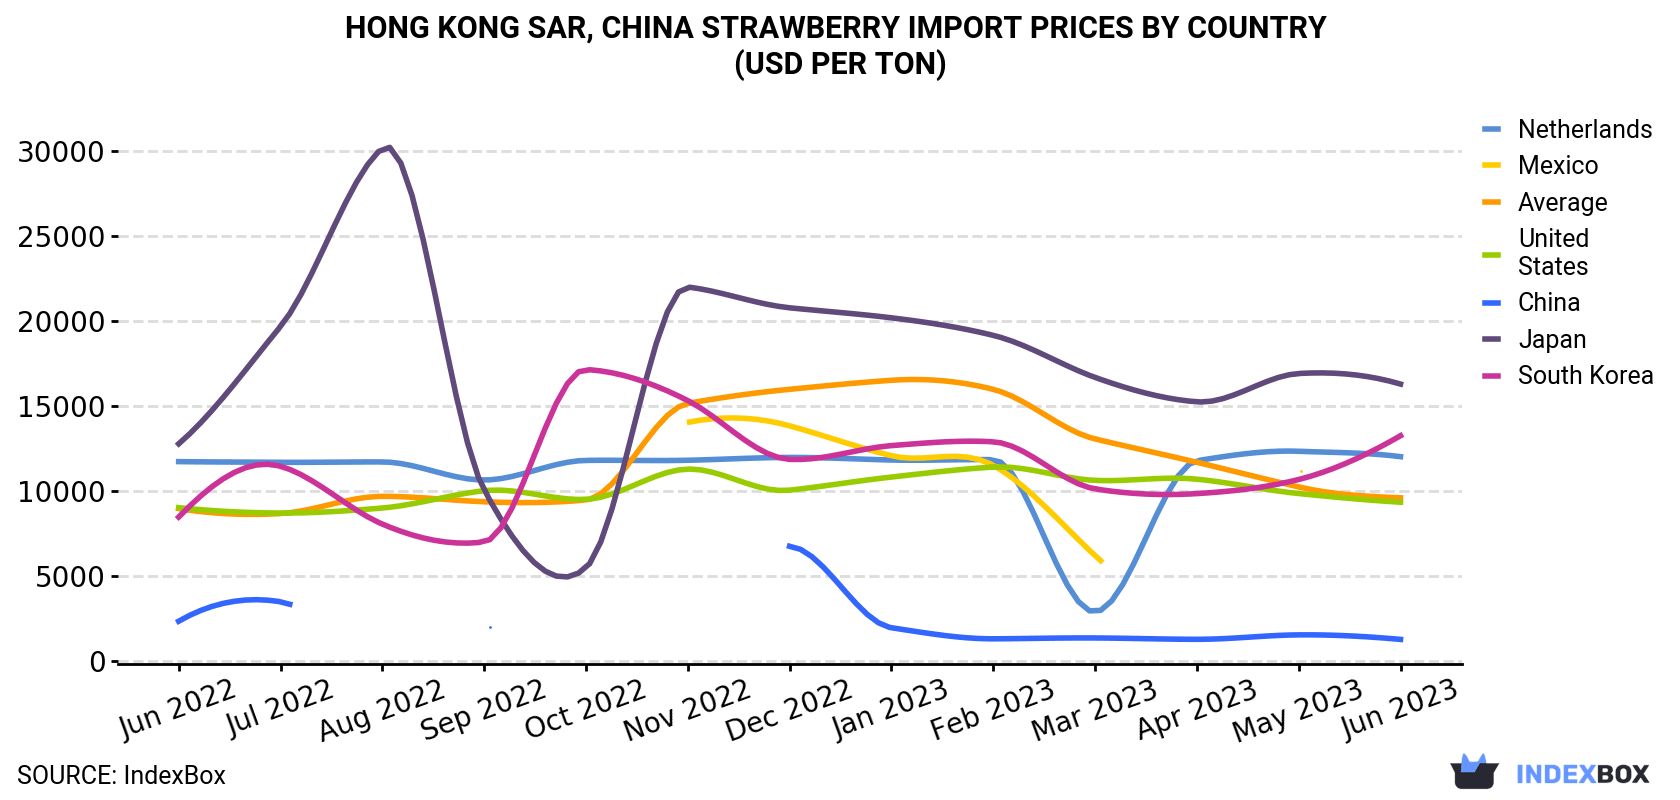 Hong Kong Strawberry Import Prices By Country (USD Per Ton)